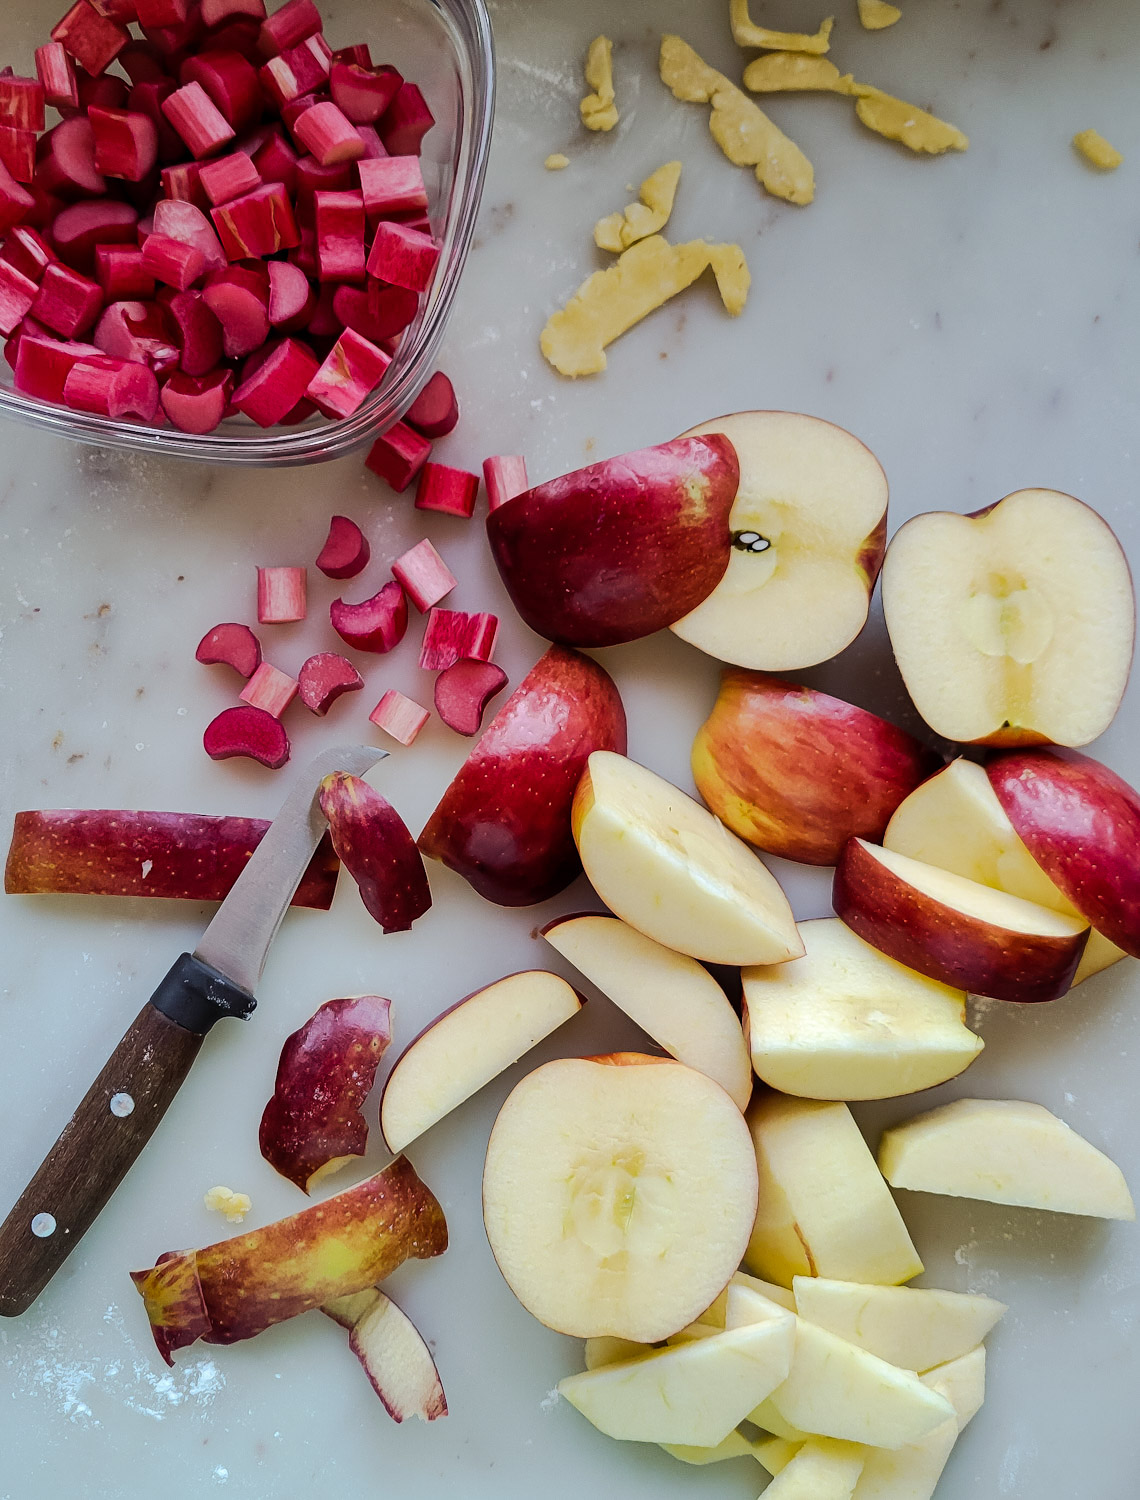 Sliced and peeled apples, and a bowl of cut up rhubarb for an Apple Rhubarb Pie